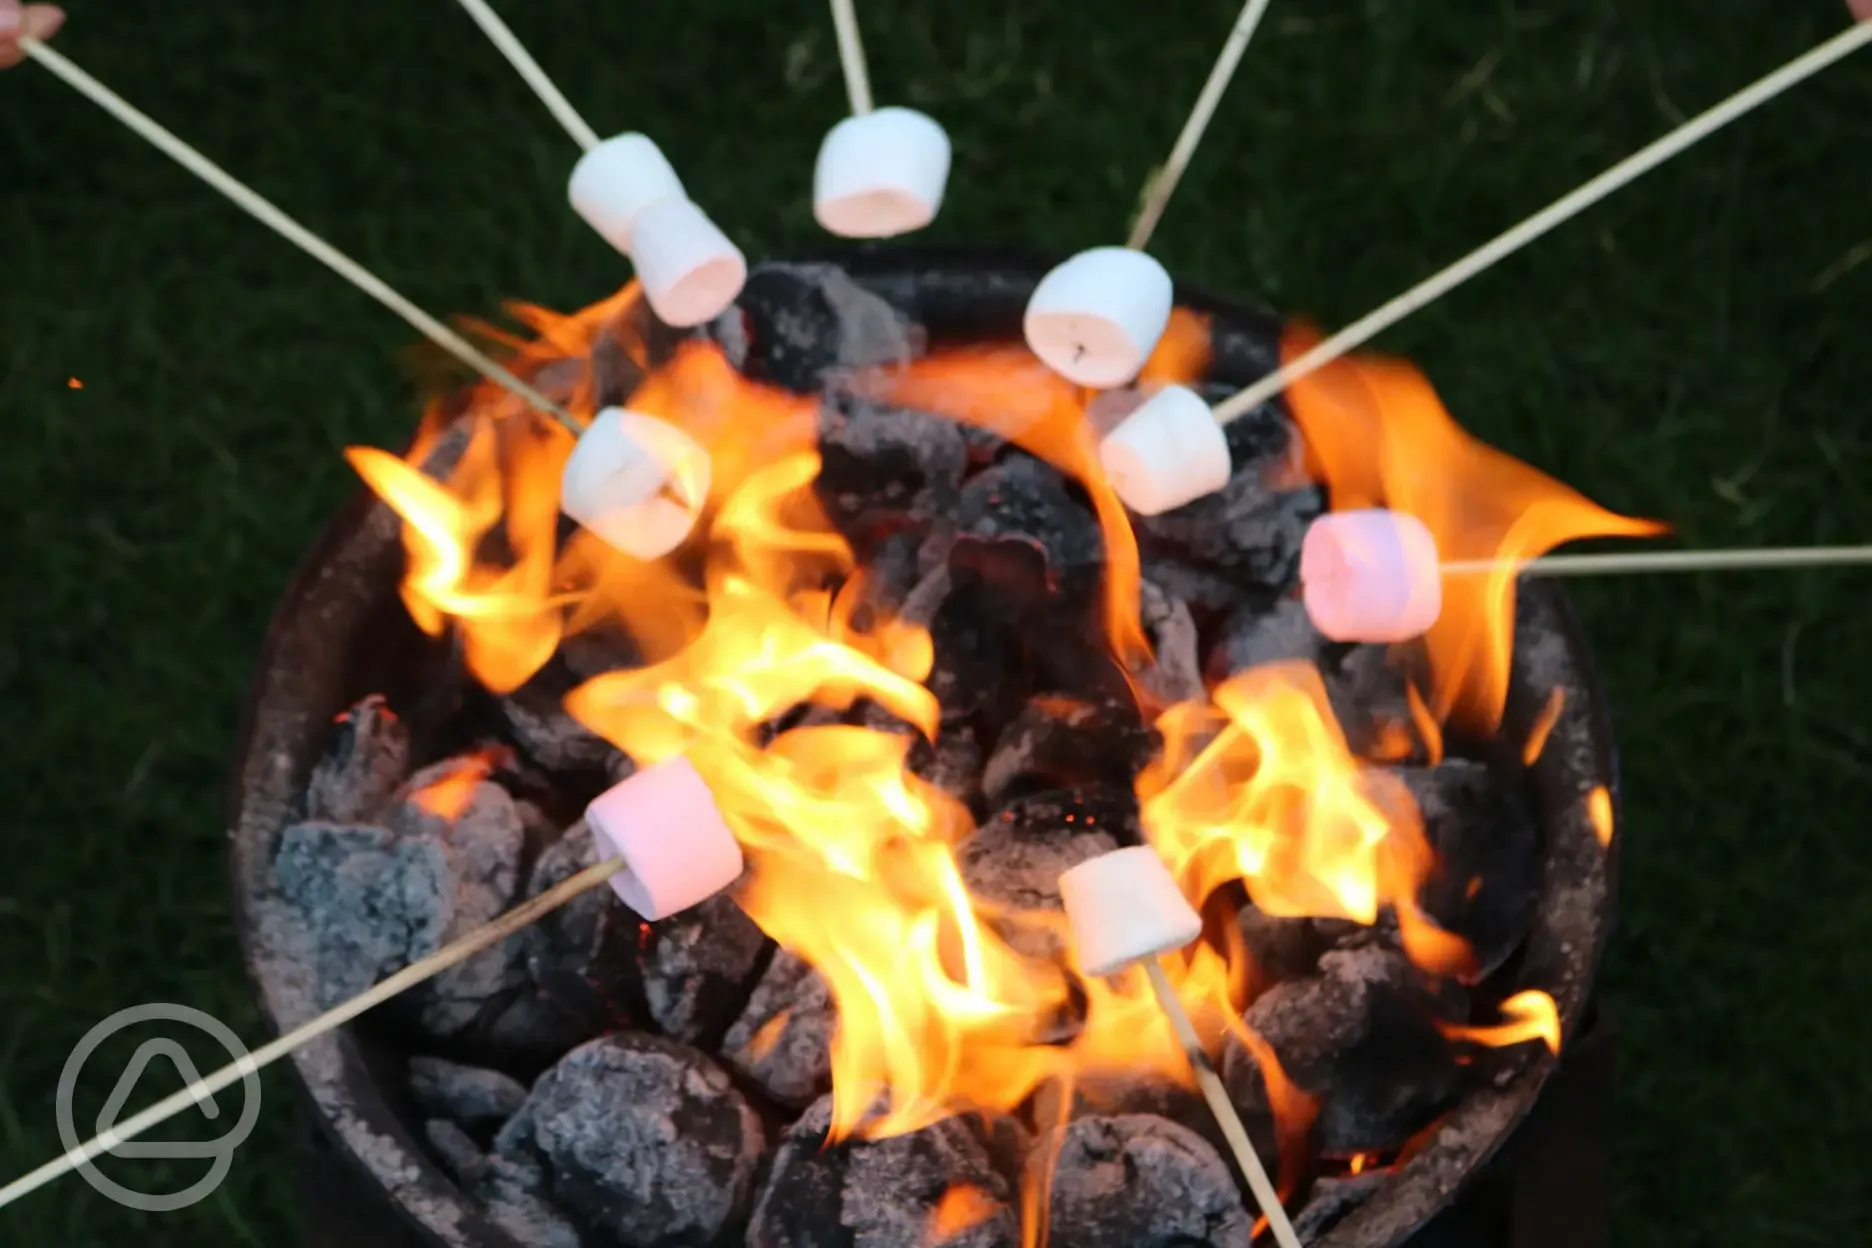 You can hire fire pit to toast marshmallows on